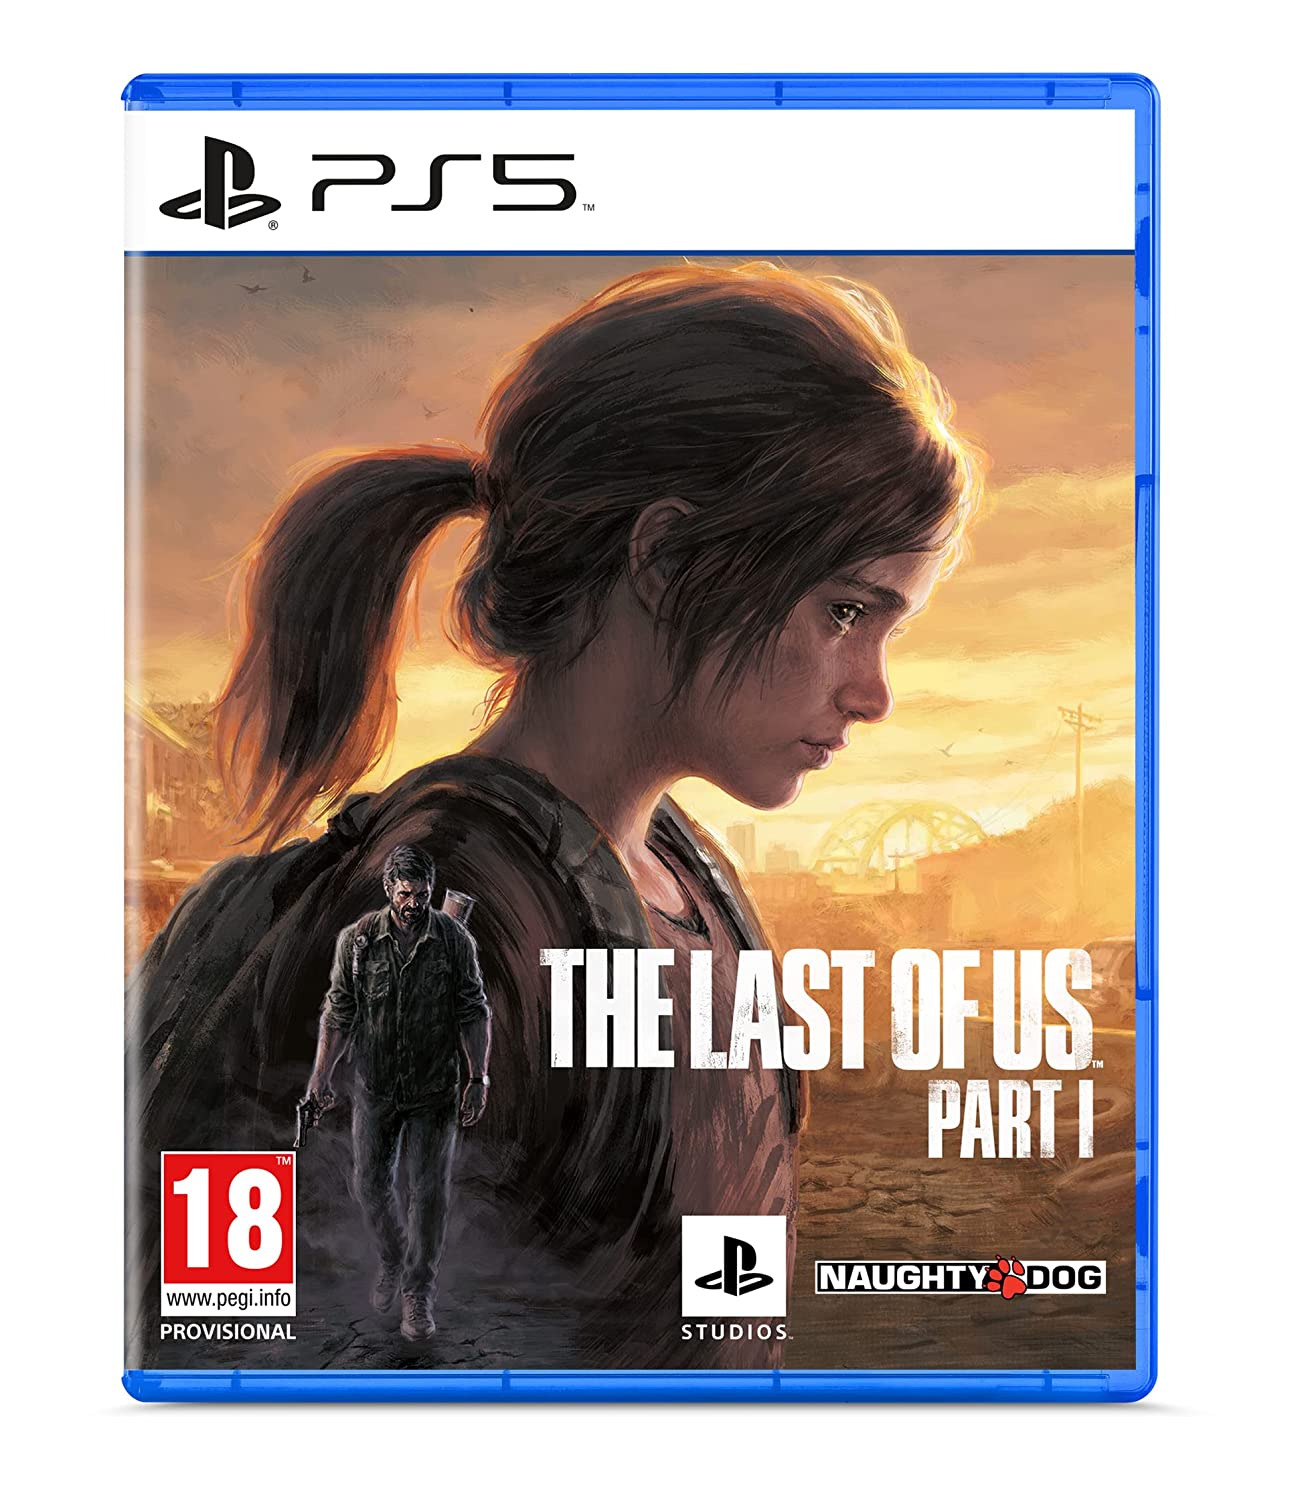 The Last of Us Part 1 PS5 (New)